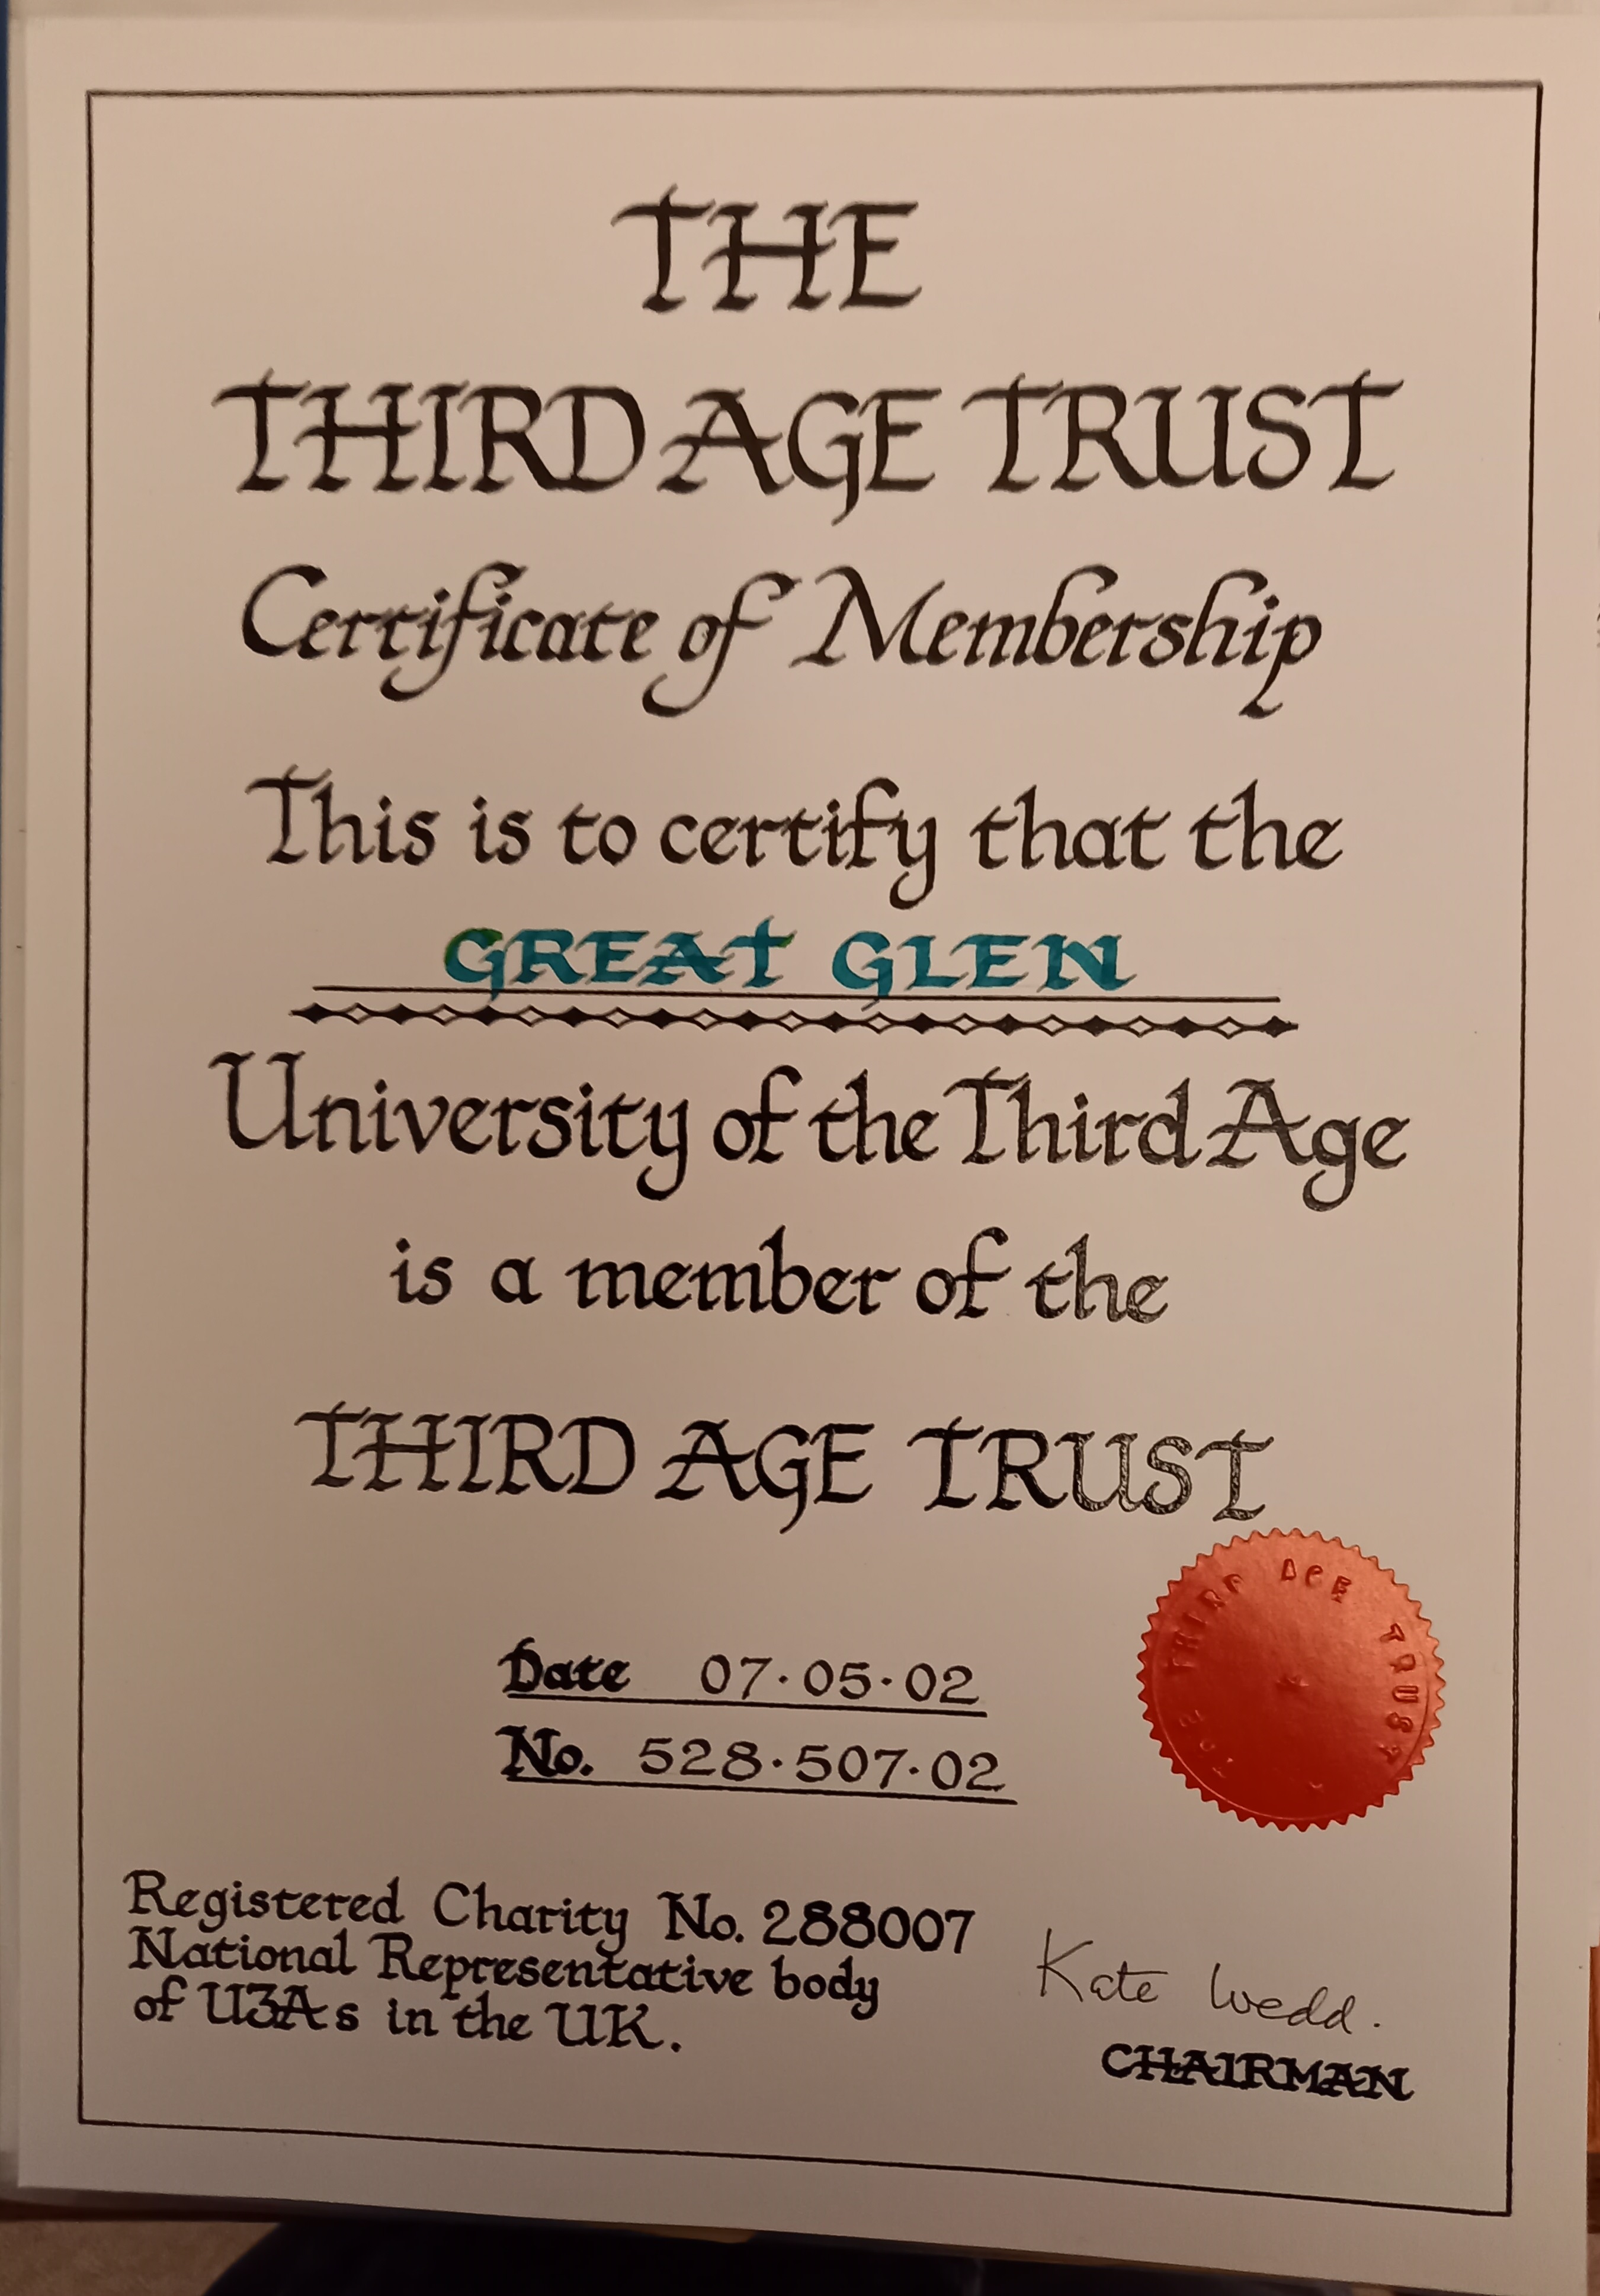 Registration with Third Age Trust